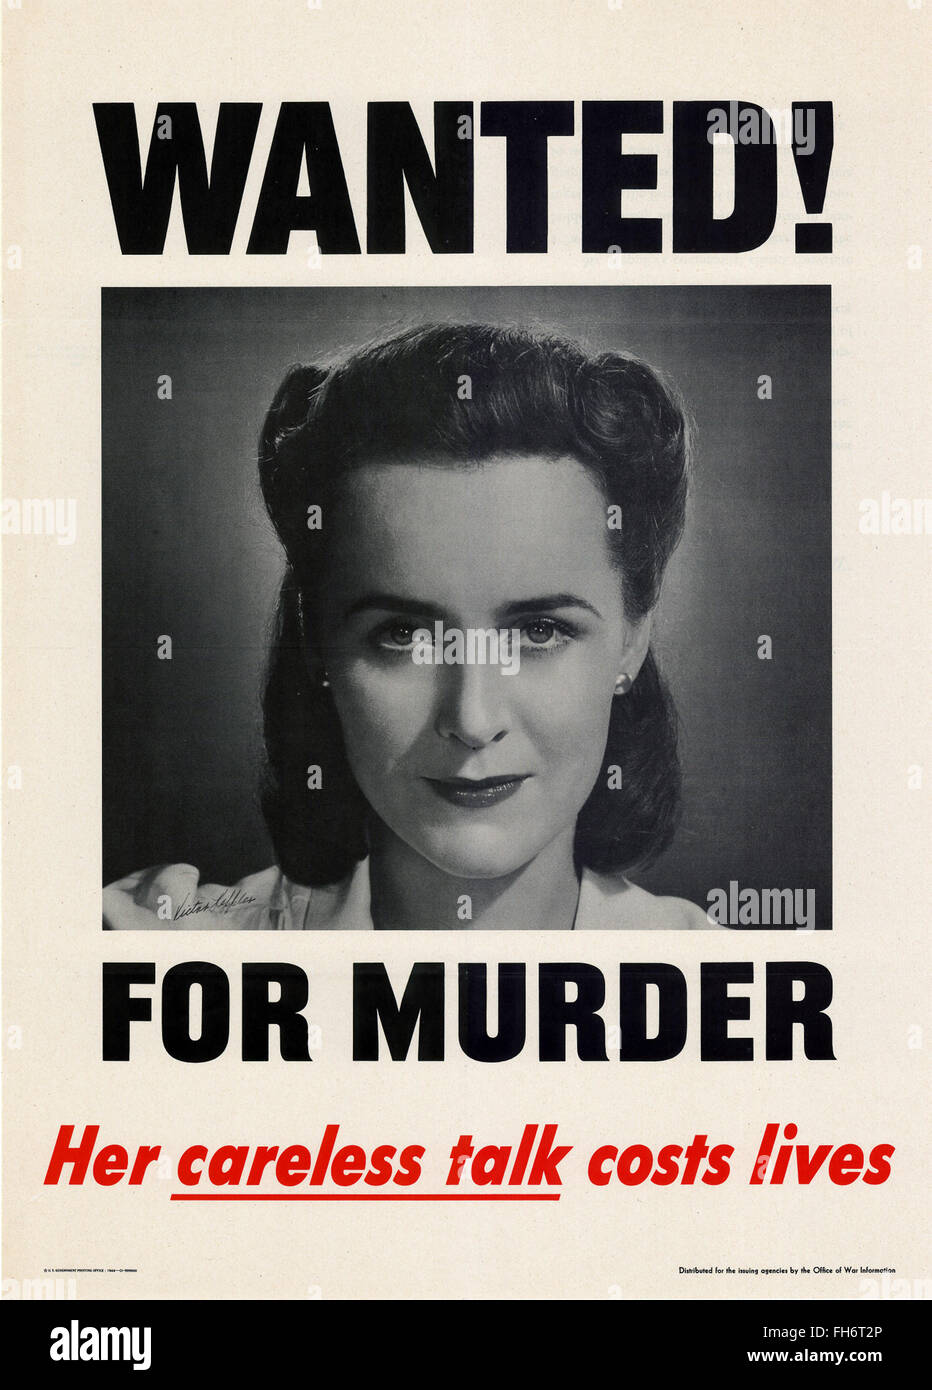 Wanted For Murder - Her Careless Talk Costs Lives - US Propaganda Poster - WWII Stock Photo